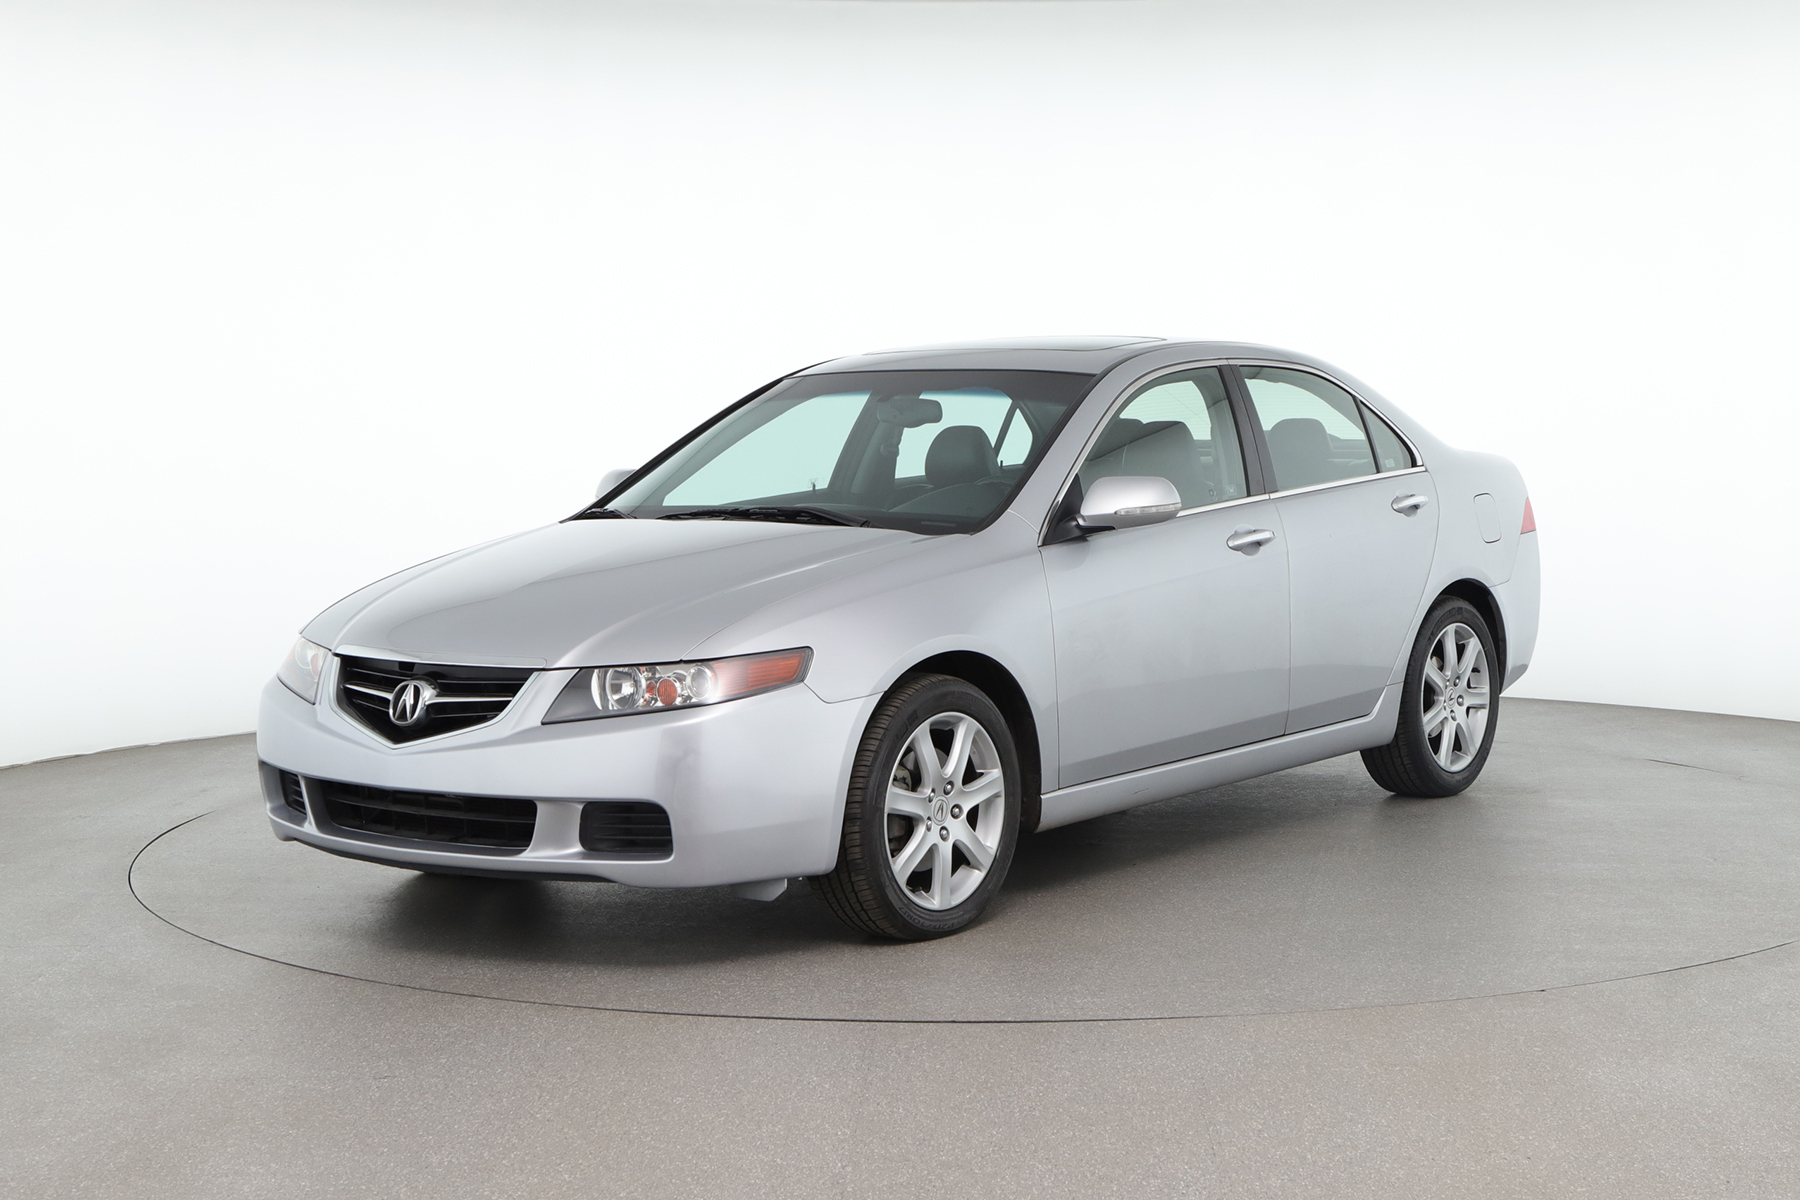 Used 2004 Silver Acura TSX for $10,200